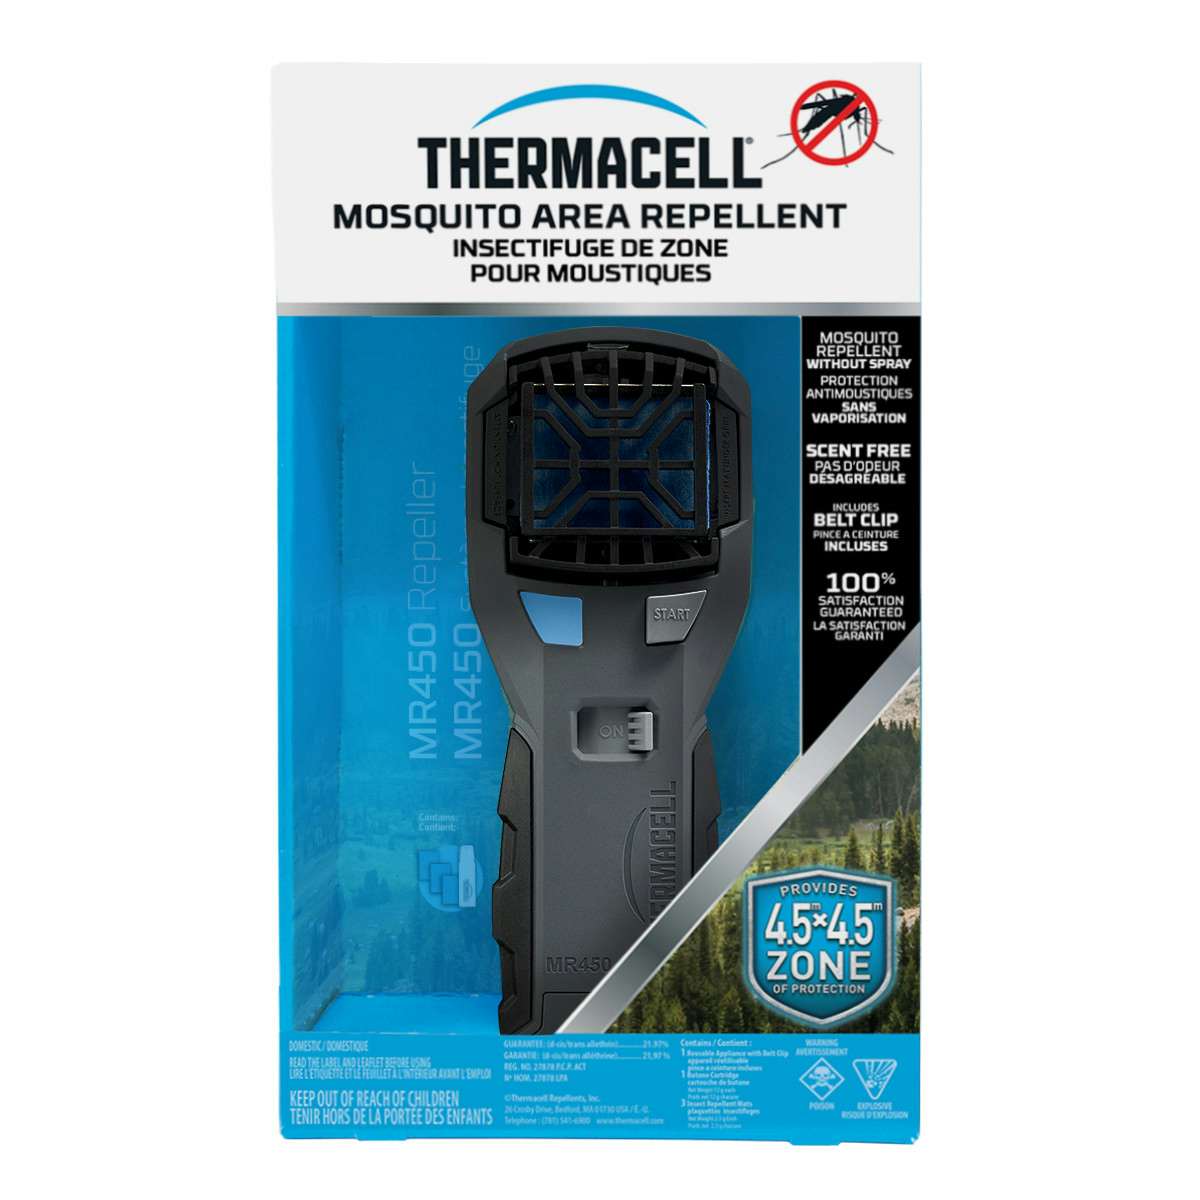 MR450 Armored Portable Mosquito Repeller Charcoal